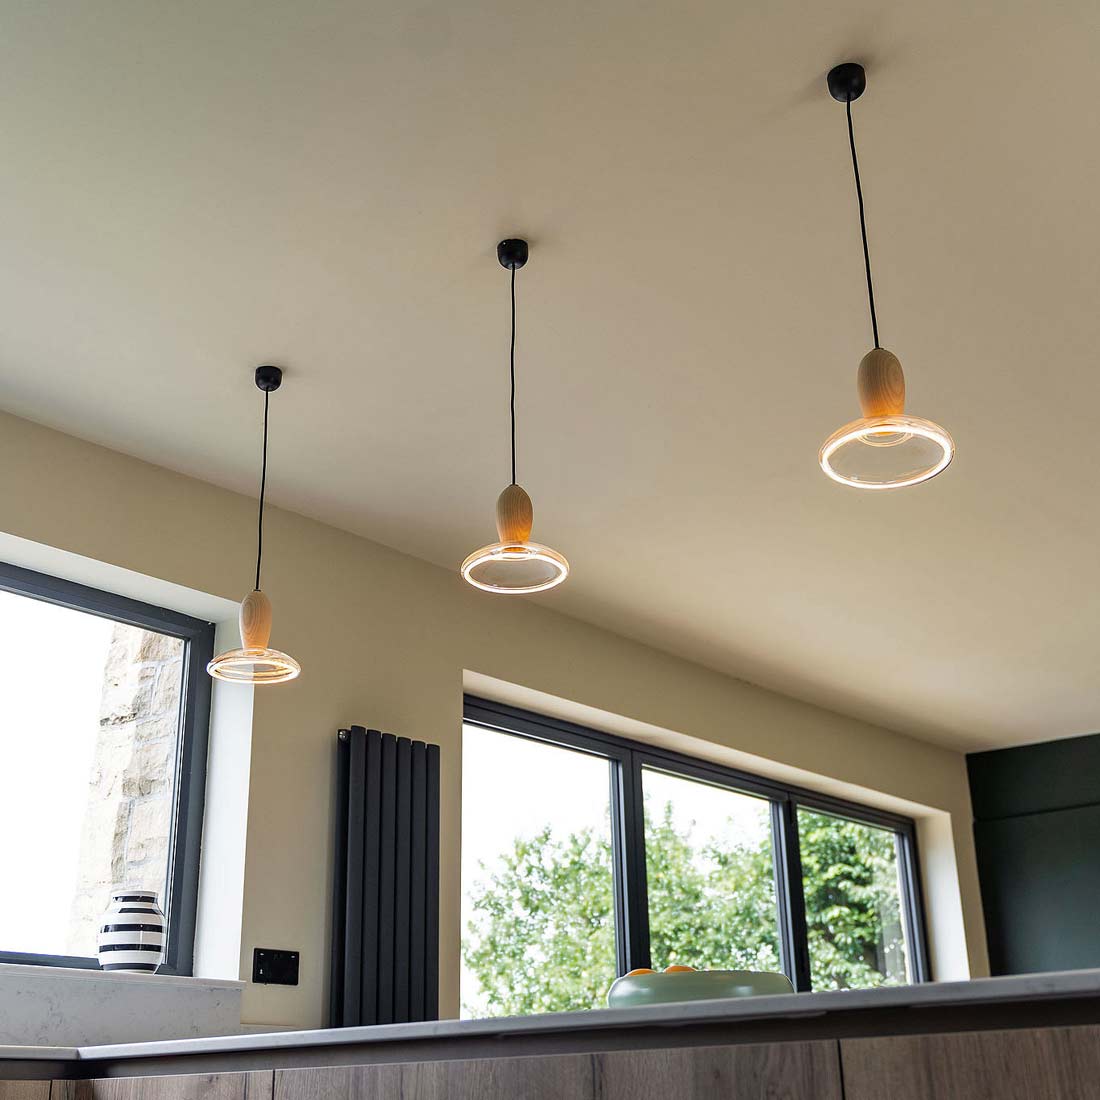 Three Well Lit Ash Wood Pendant Lights supplied by South Charlotte Fine Lighting are pictured lighting a breakfast bar